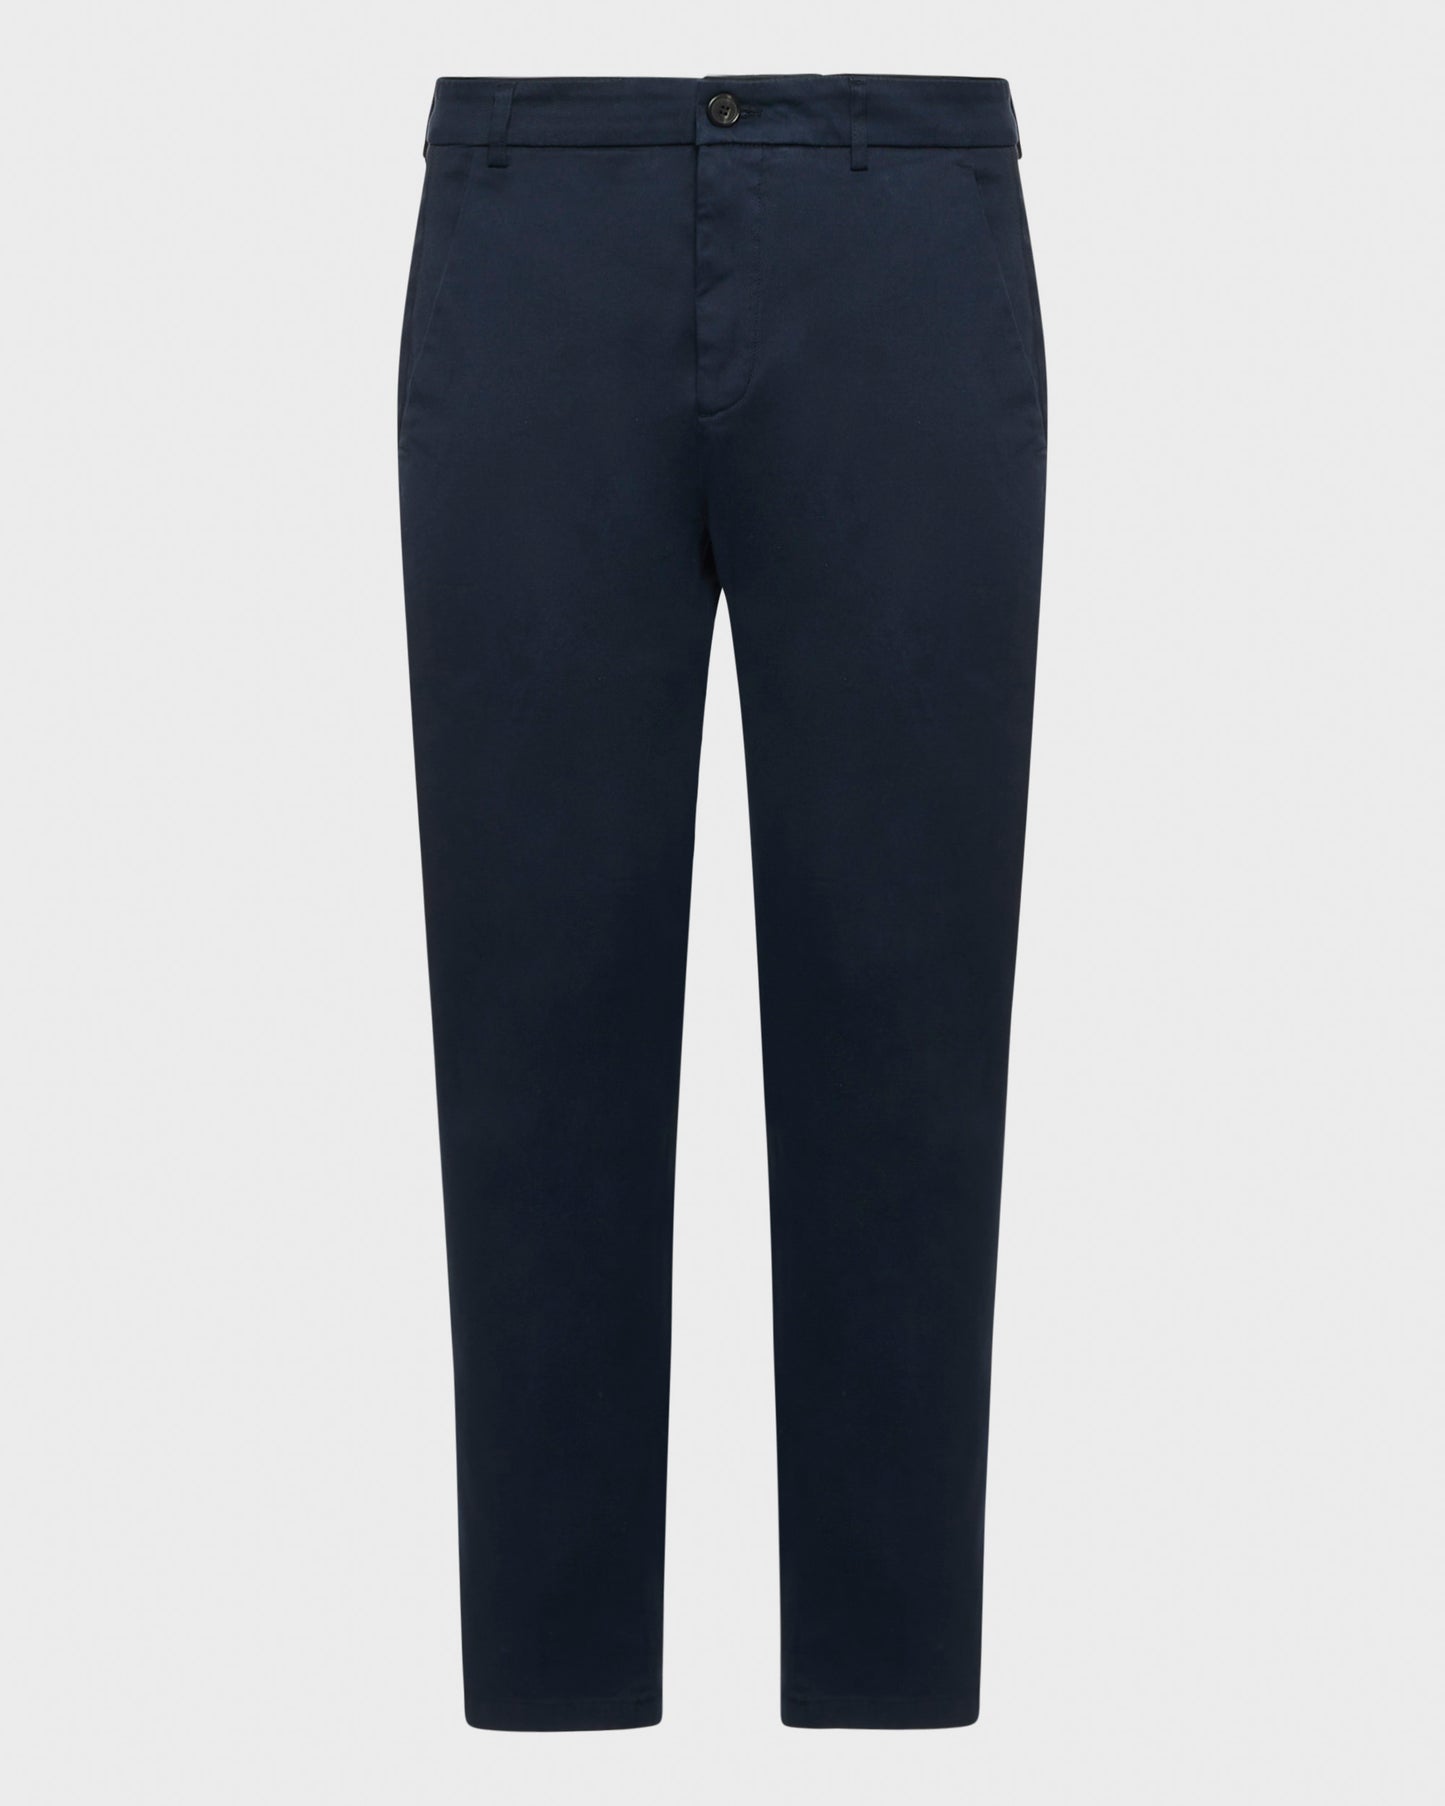 Prince slim-fit crop chino trouser